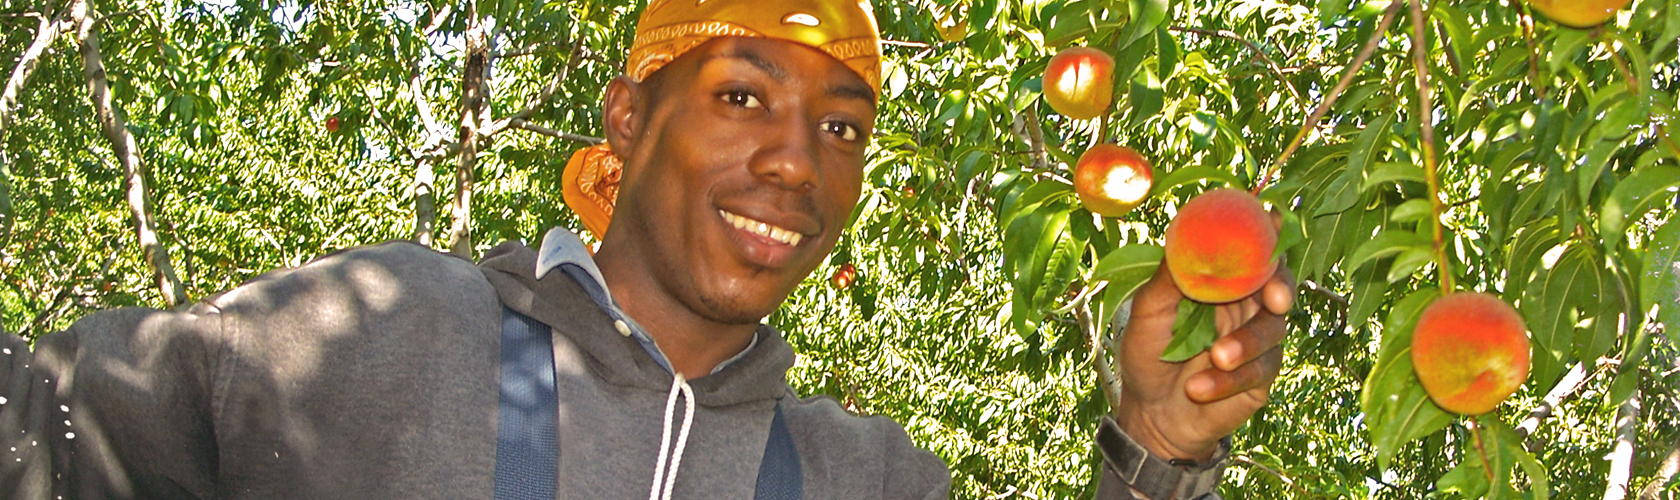 NMWIG, Happy Guy with Peaches, Niagara Migrant Workers Investment Group